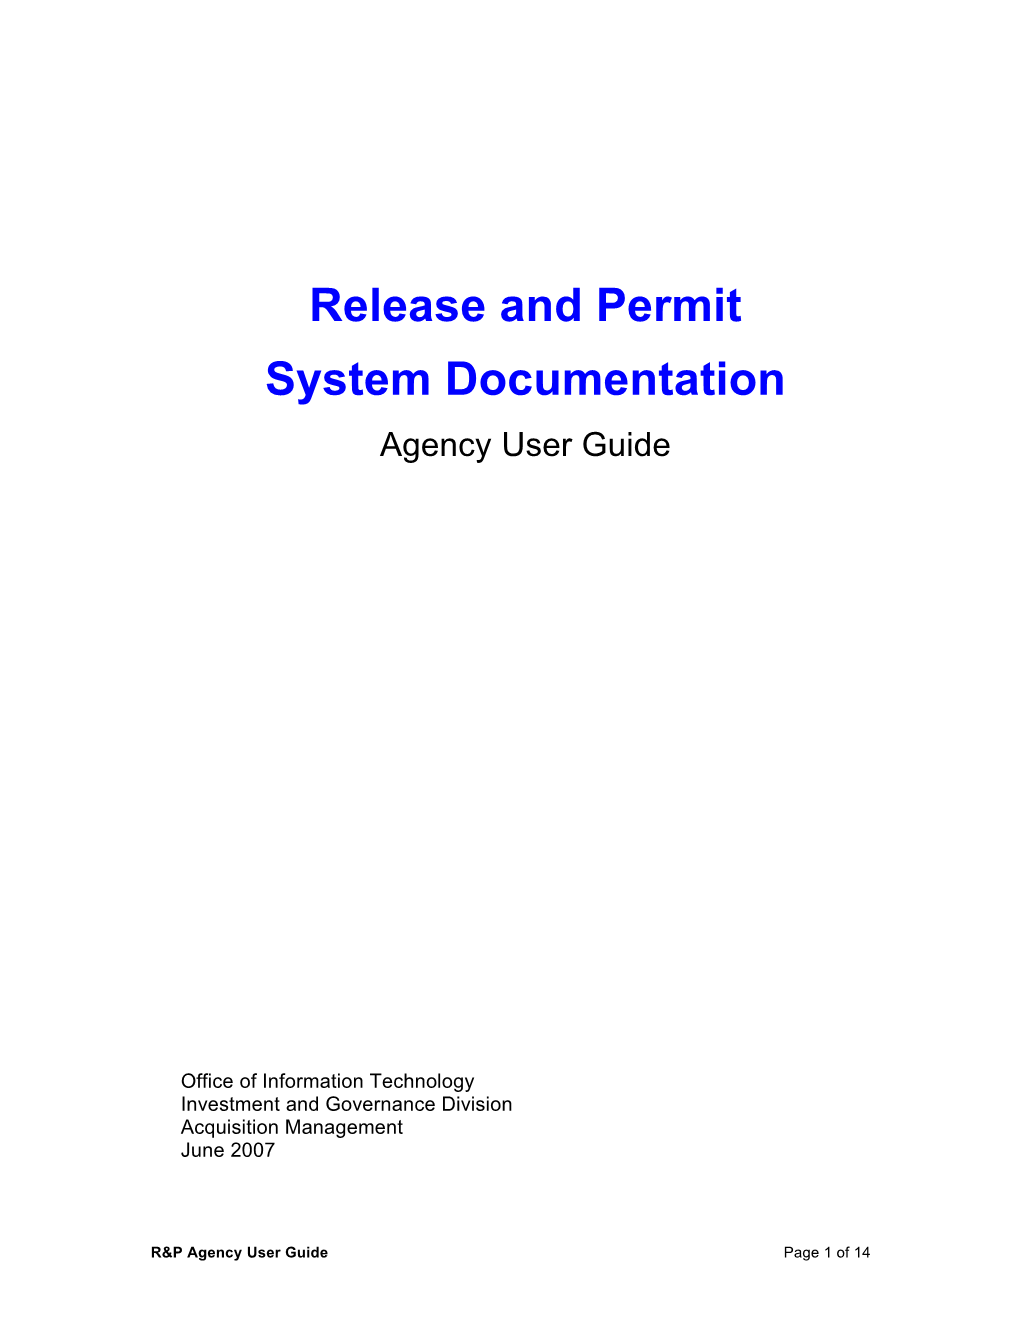 Release and Permit System